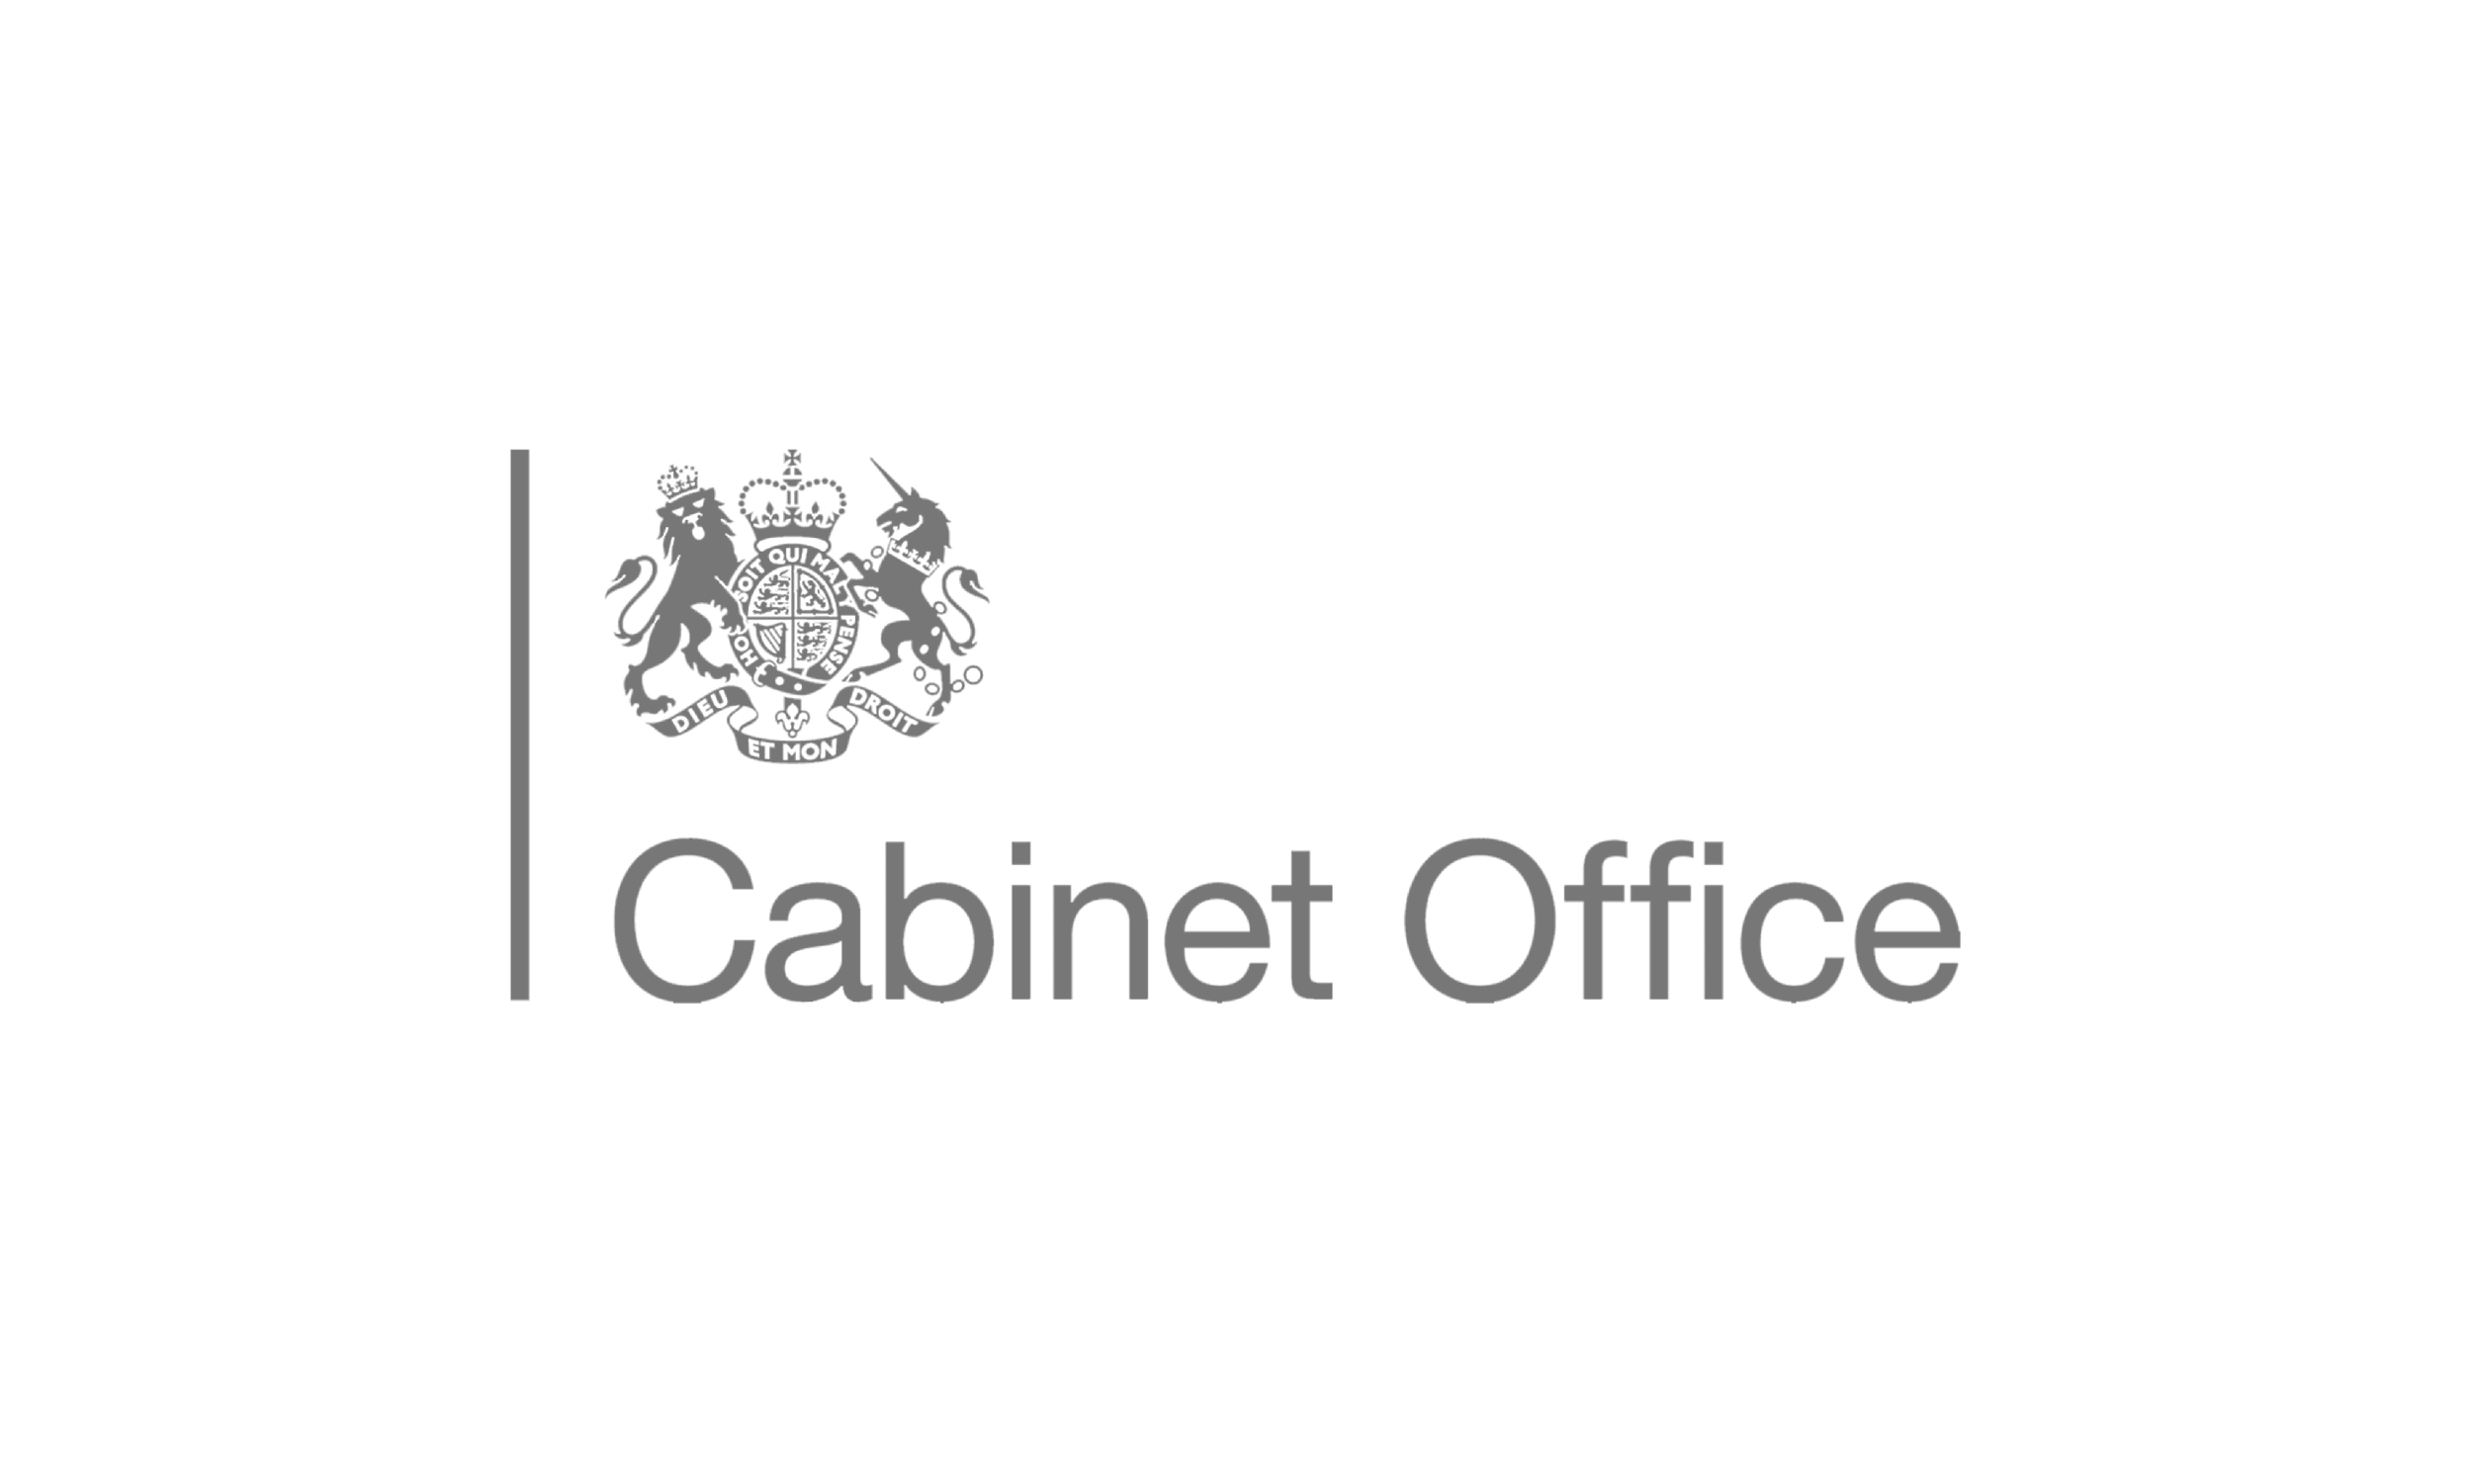 Cabinet Office@2x.png